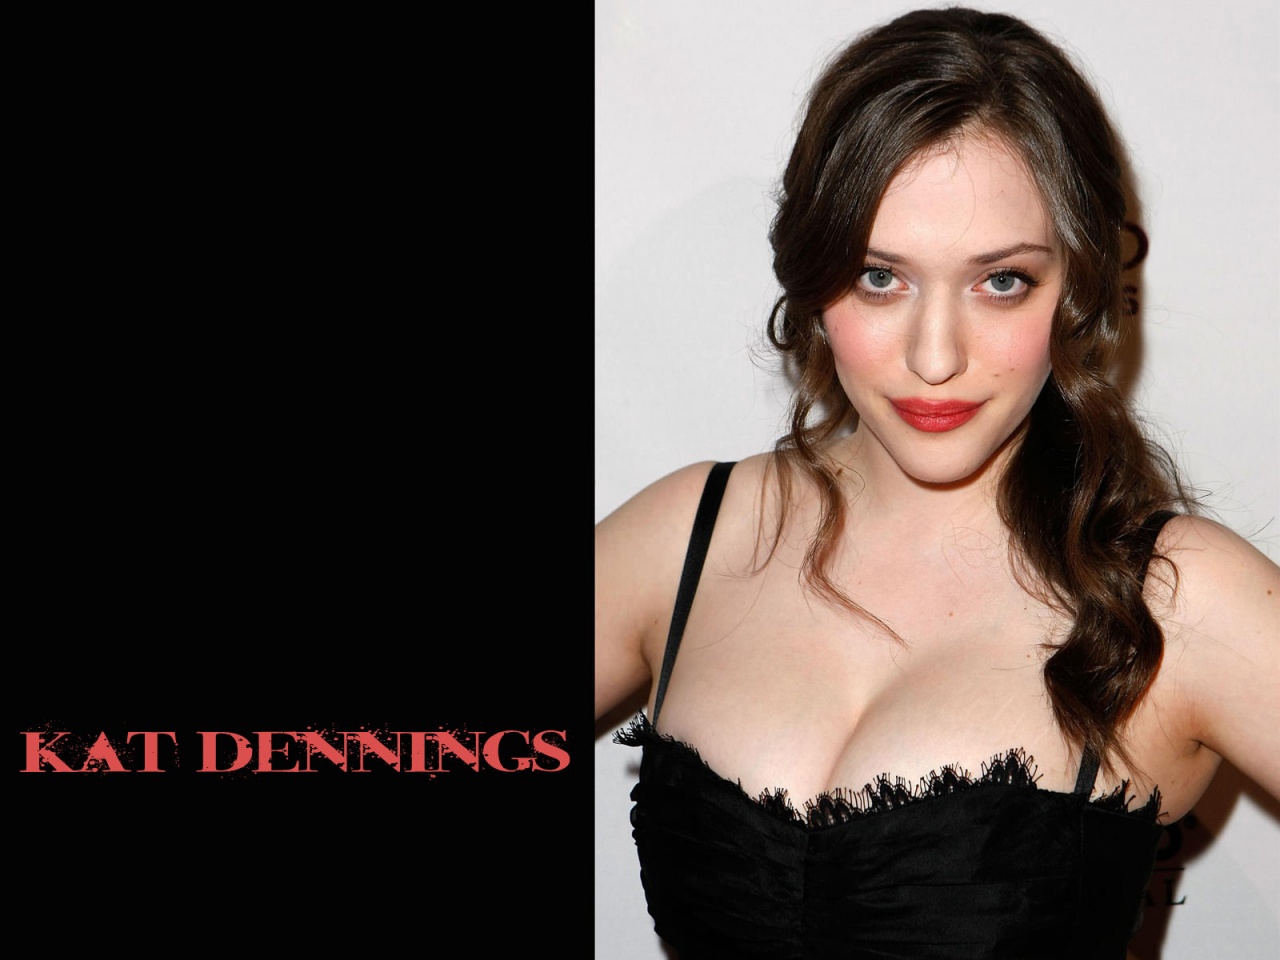 Kat Dennings Big Boobs Images Wallpaper, HD Celebrities 4K Wallpapers,  Images, Photos and Background - Wallpapers Den